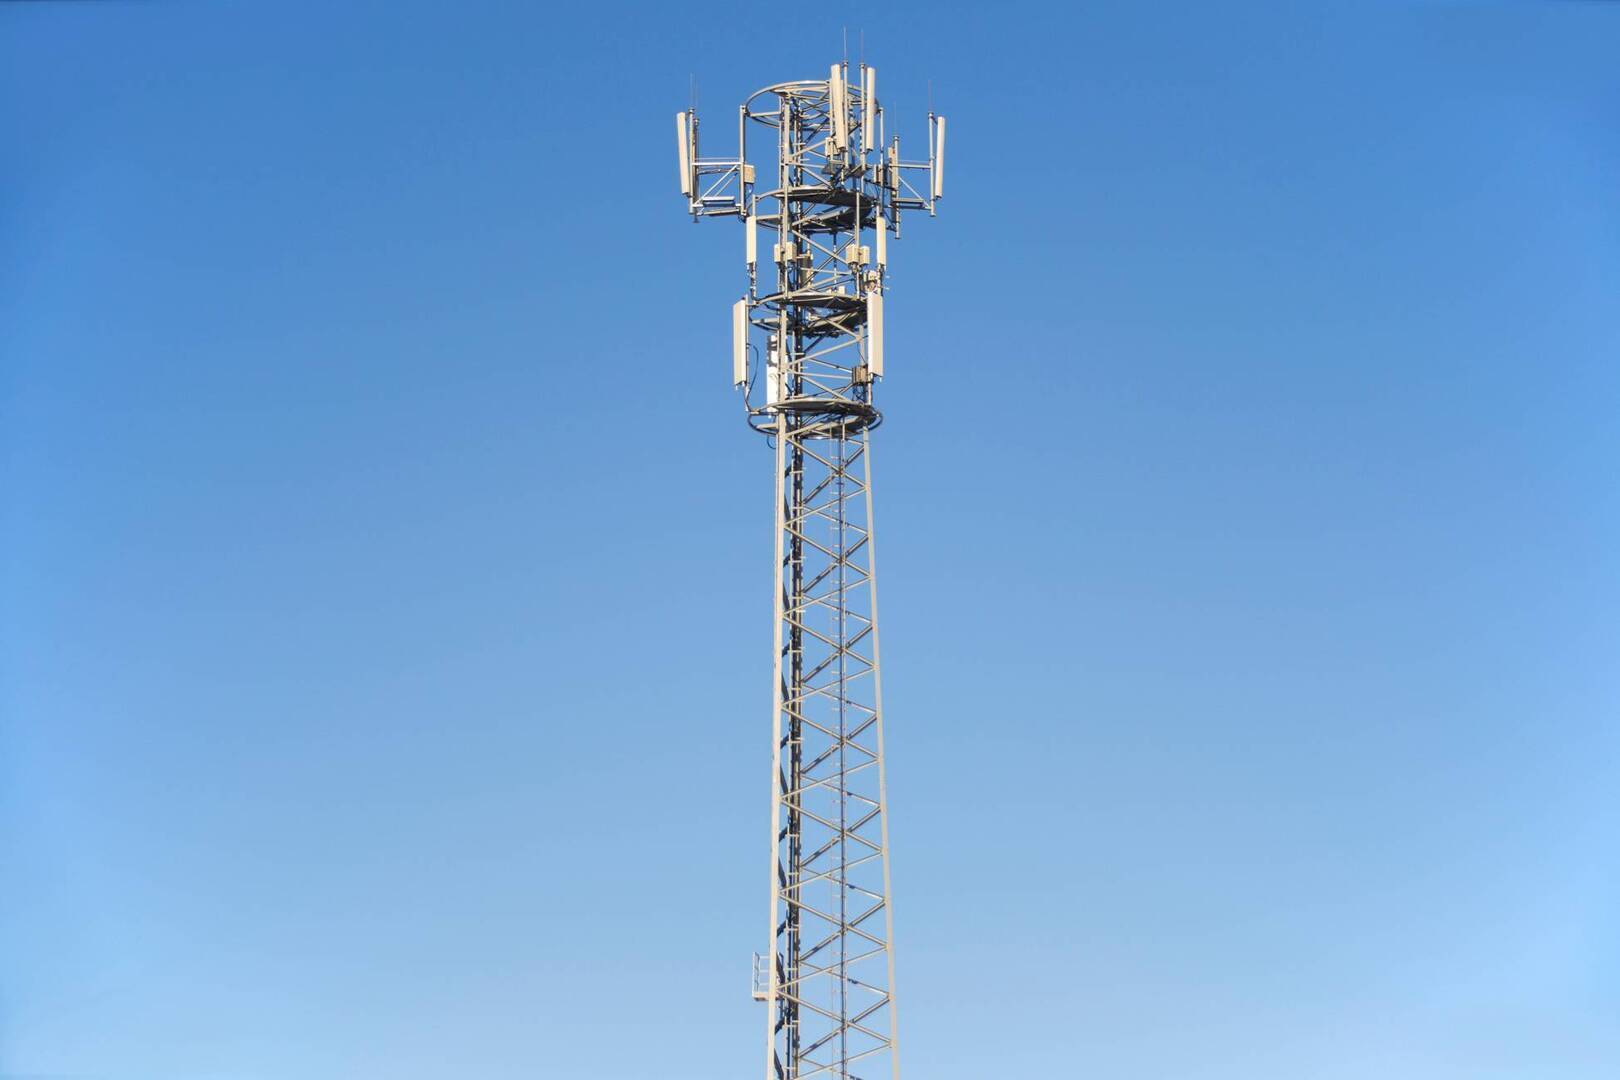 Gen 2 SD-WAN can use cell tower pictured